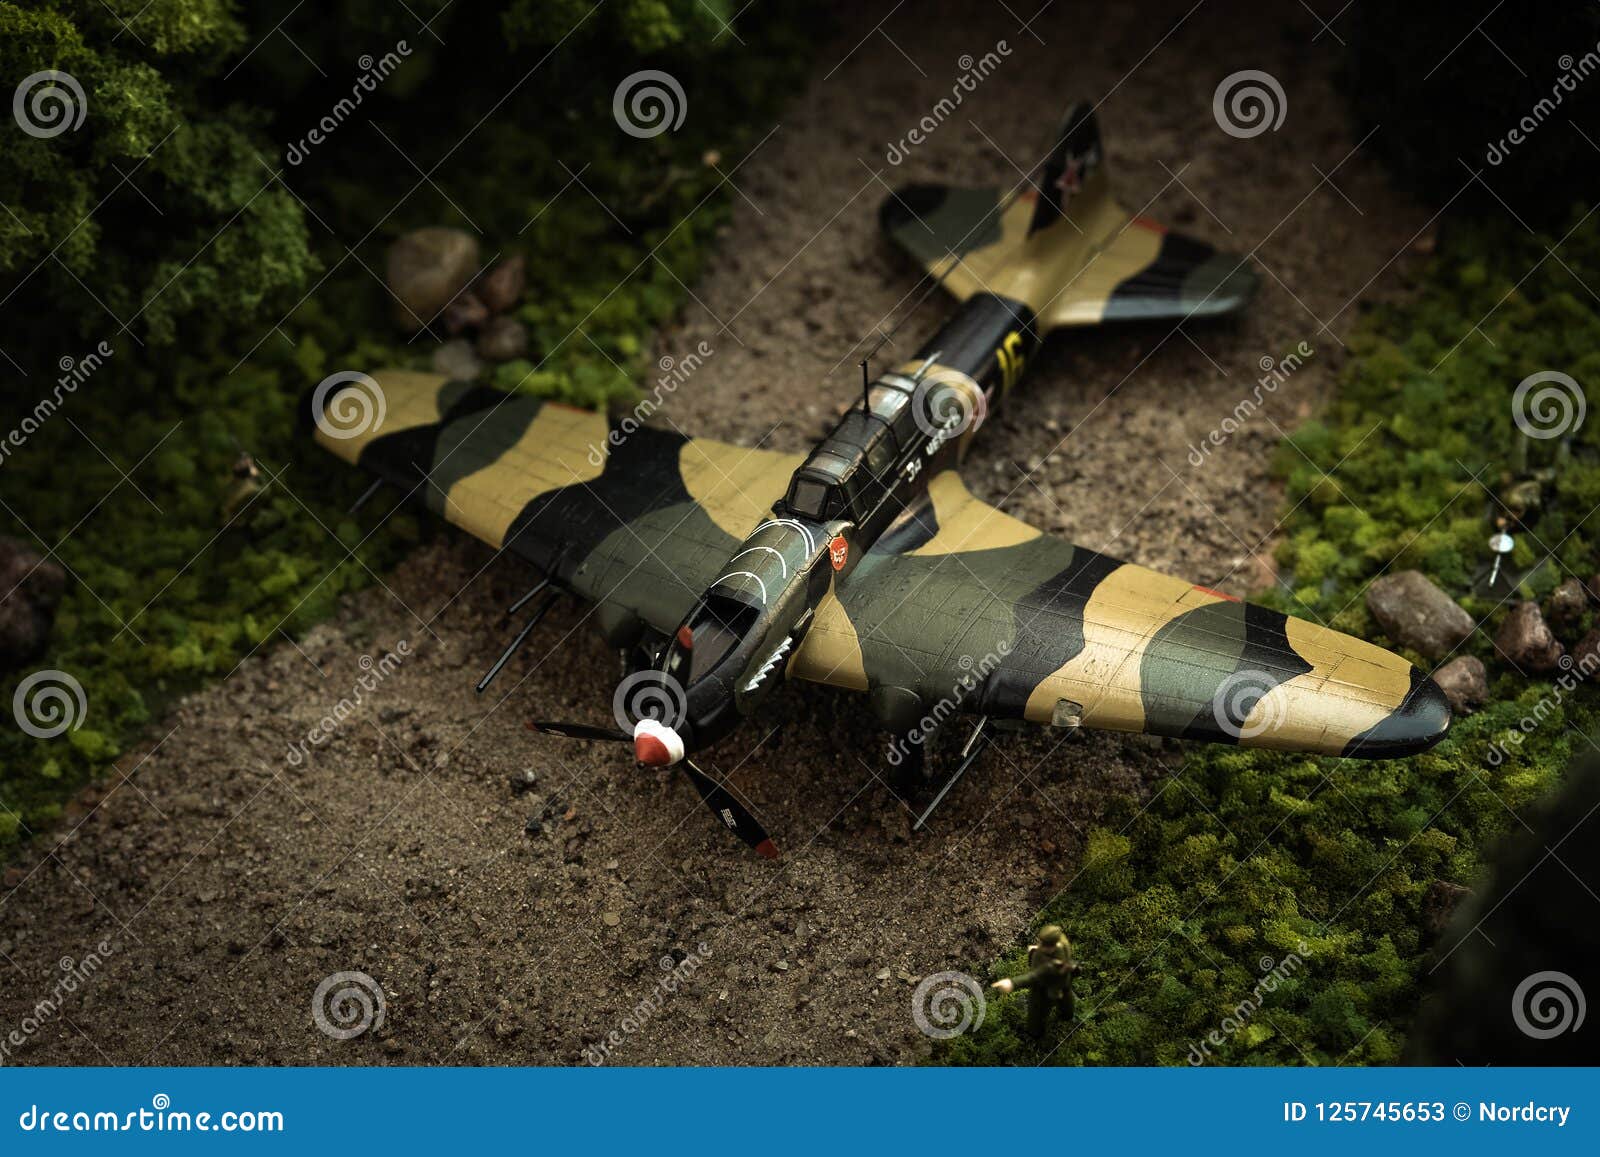 model of airplane il-2 with soldiers in diorama